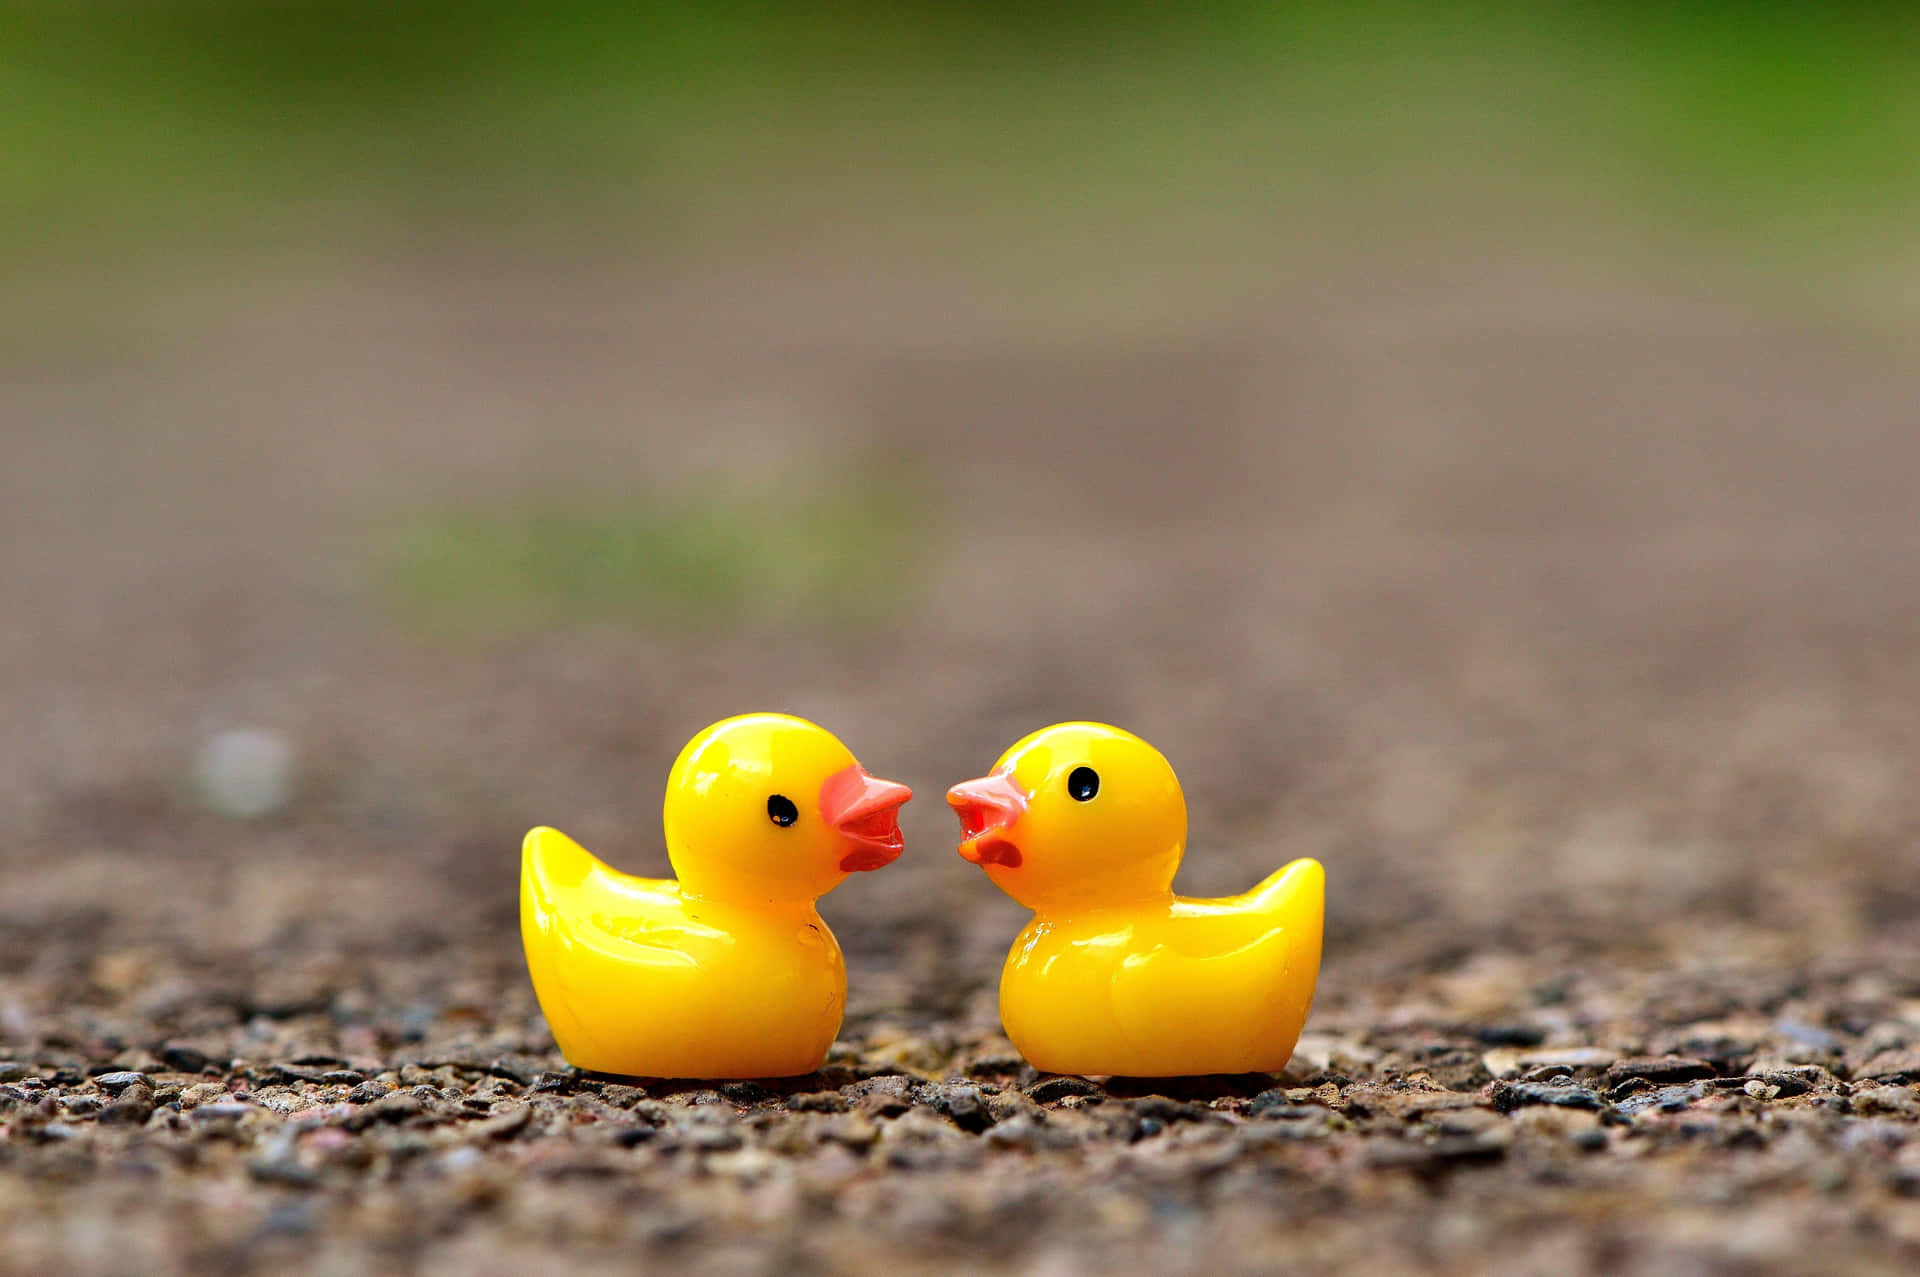 Two Rubber Ducks Together.jpg Wallpaper